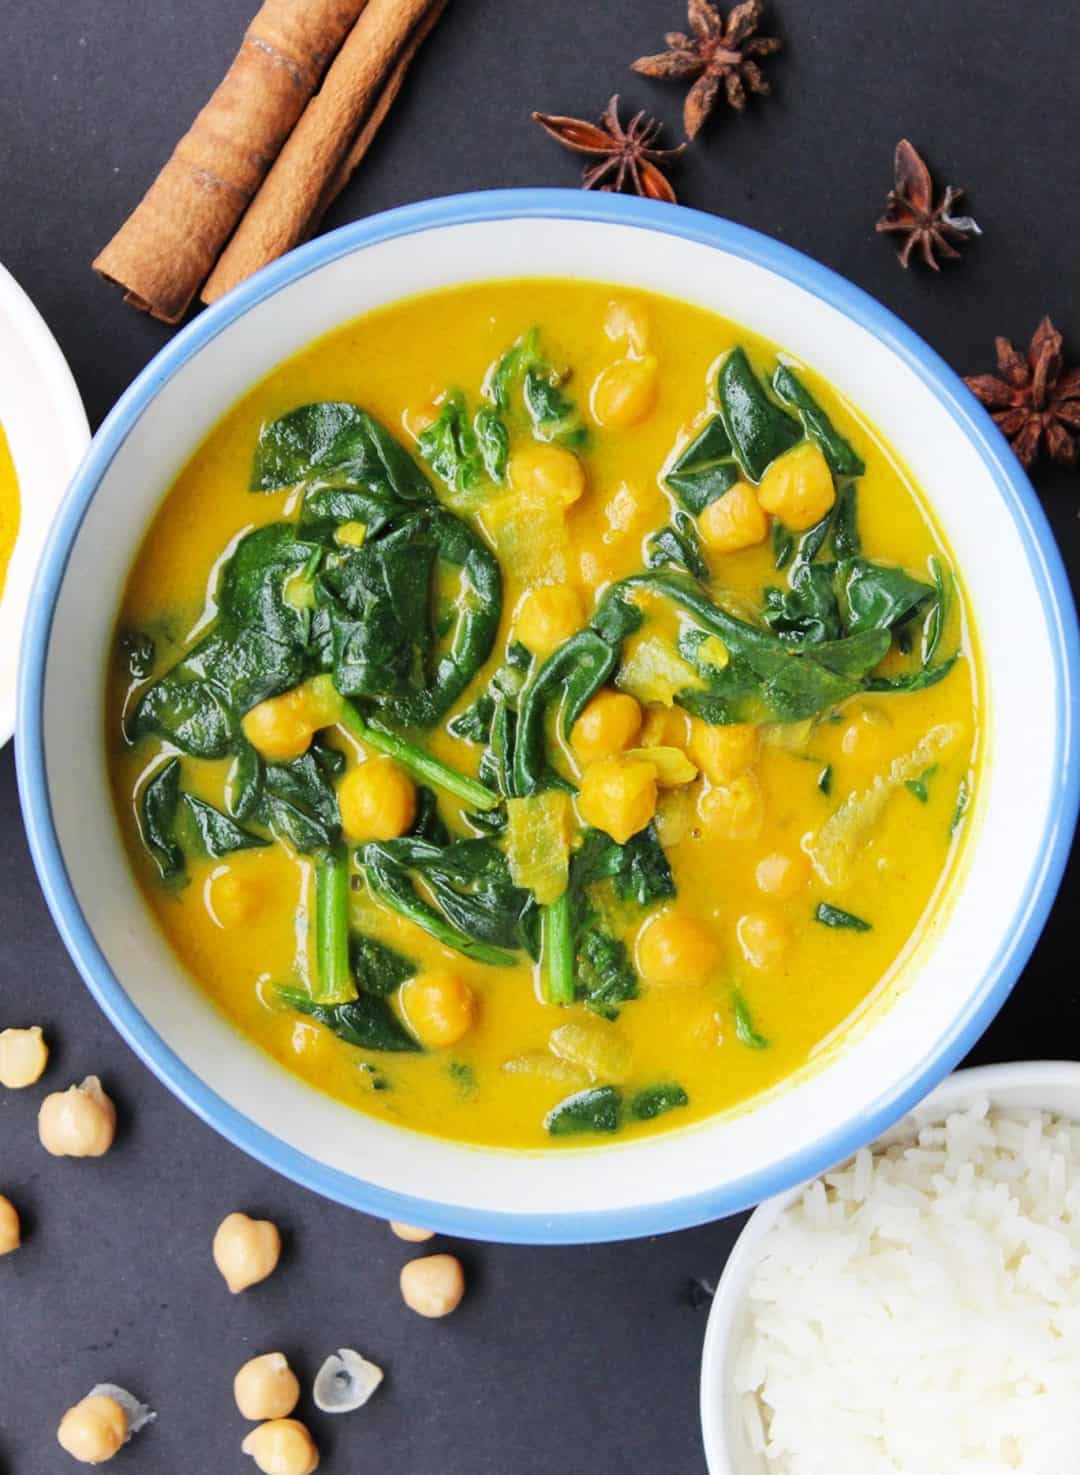 A bowl of chickpea & spinach curry on a black tabletop, styled with the ingredients used in the dish